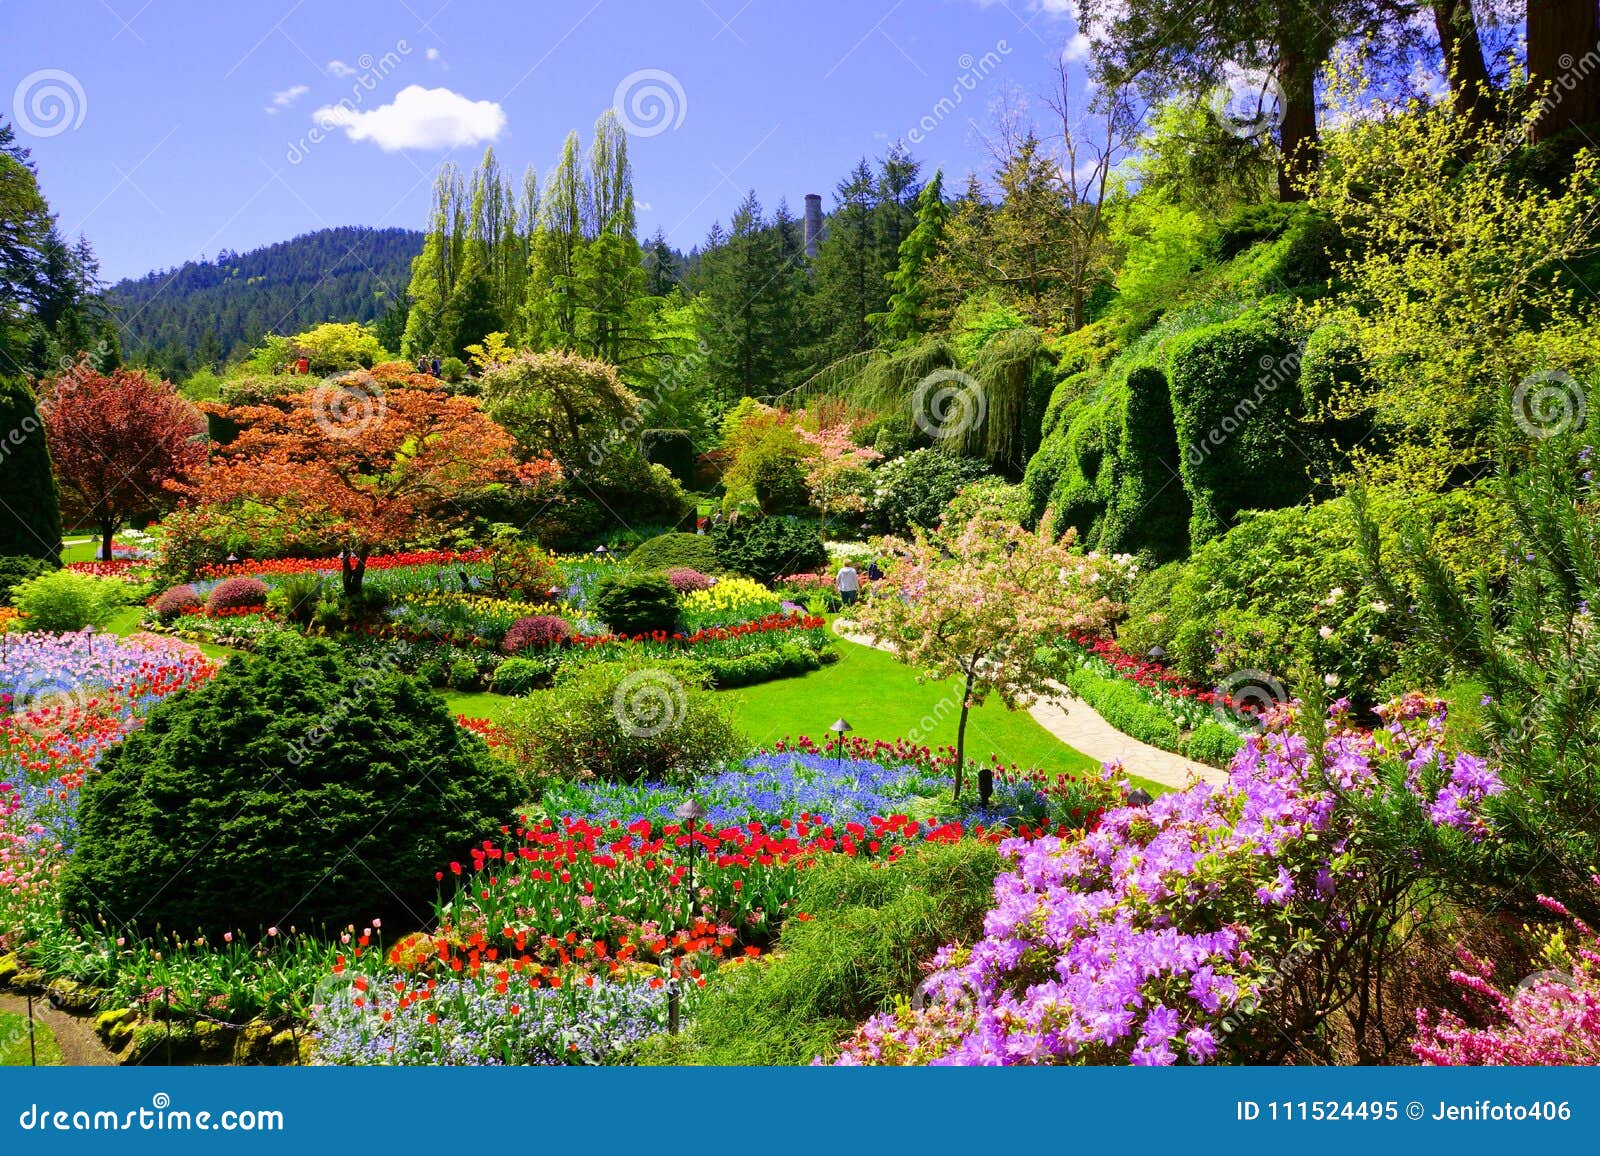 view over colorful flowers of a garden at springtime, victoria, canada